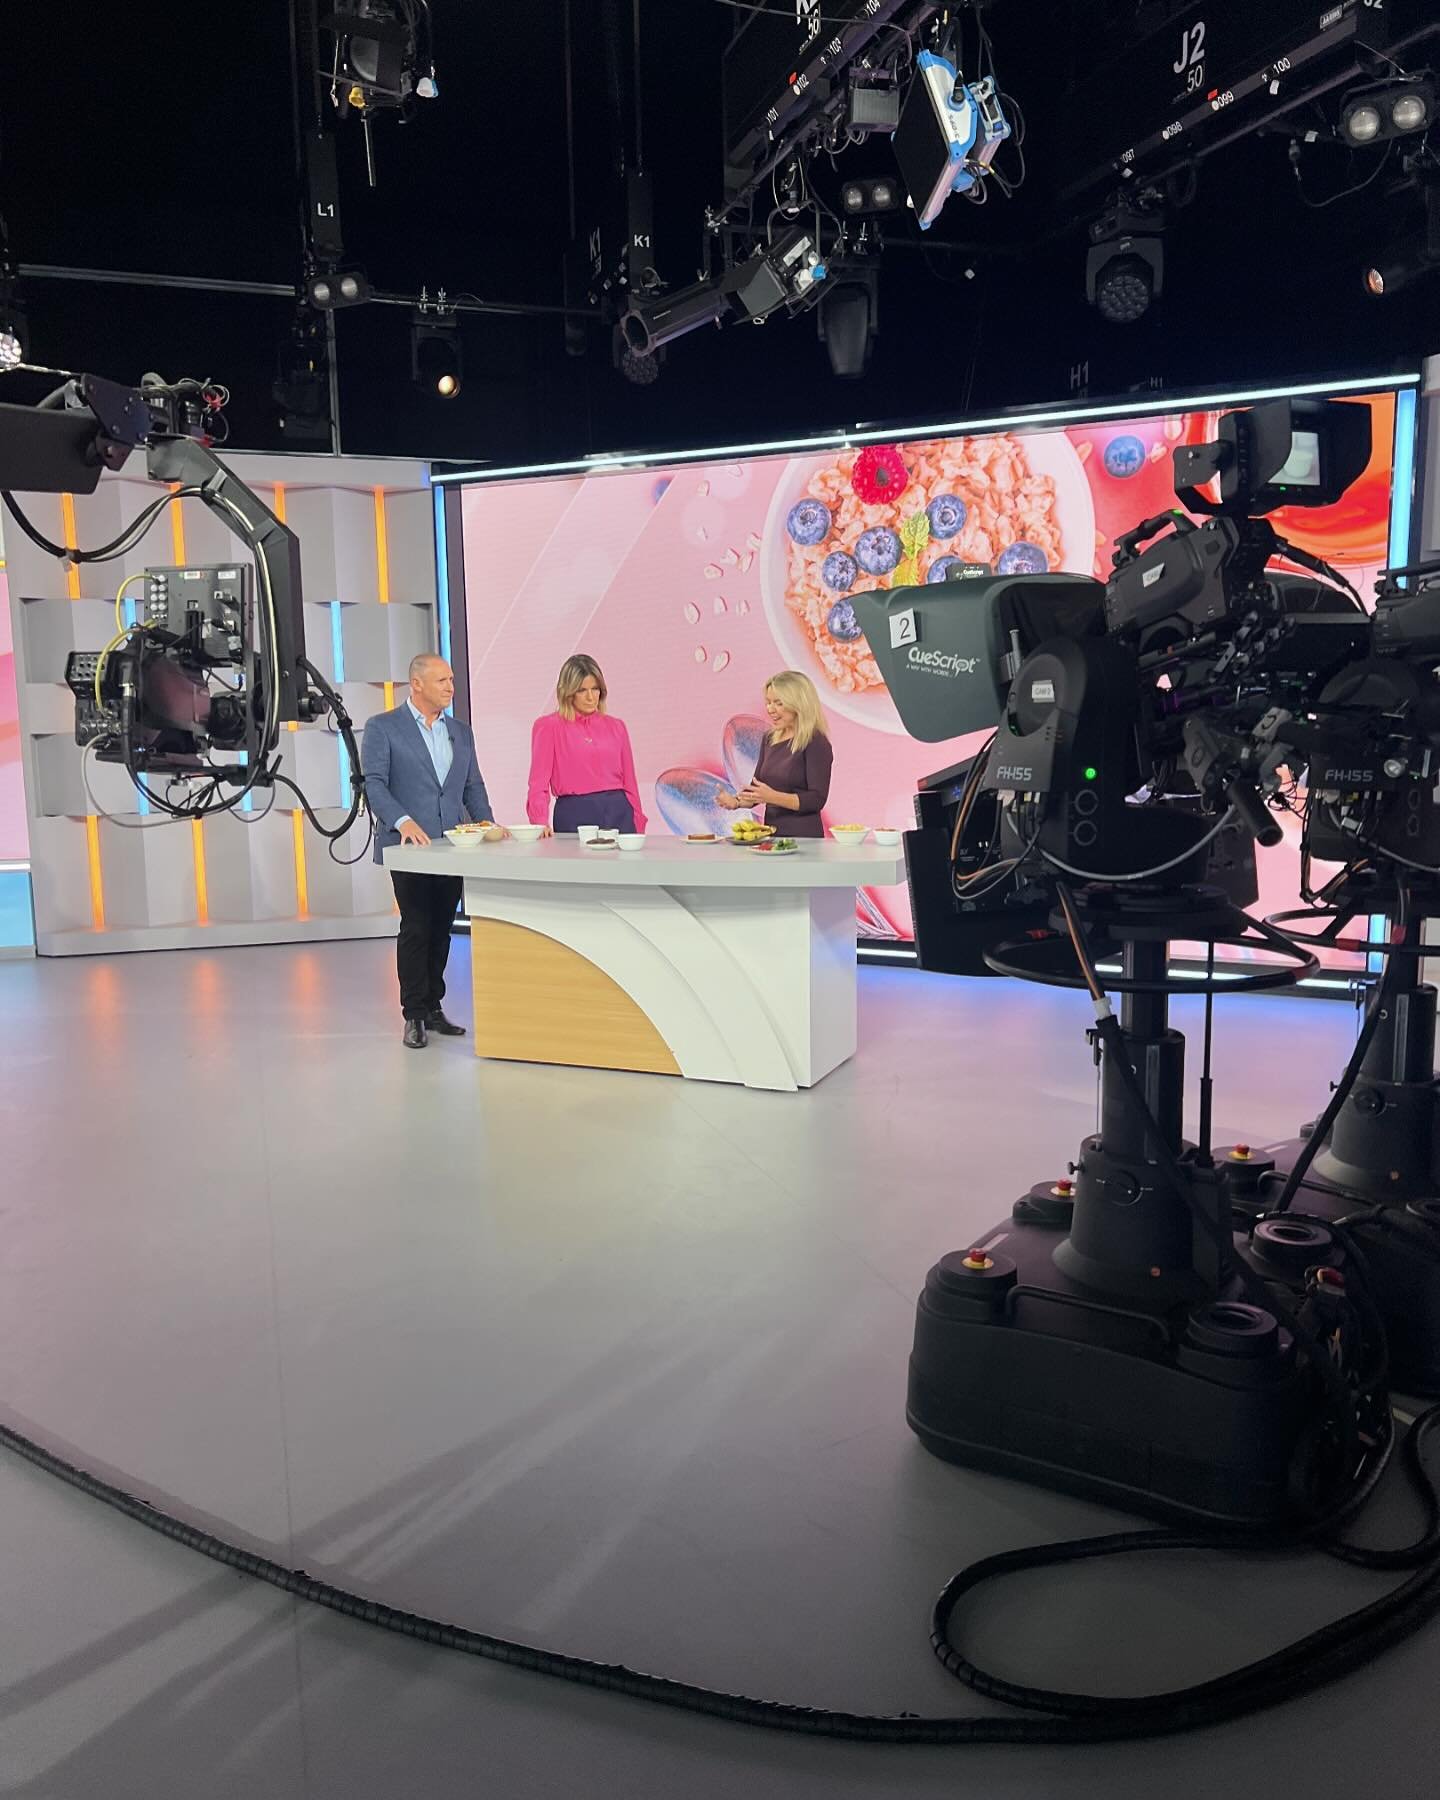 🎥 Behind the scenes in studio 💡💕 It is a room like you&rsquo;ve never seen before ✨✨

So much fun and while @kyliegillies was excited about bananas 🍌 @larryemdur couldn&rsquo;t keep his hands off the chocolate 🍫🤏🏼😂

#healthyfood #nutrition #t